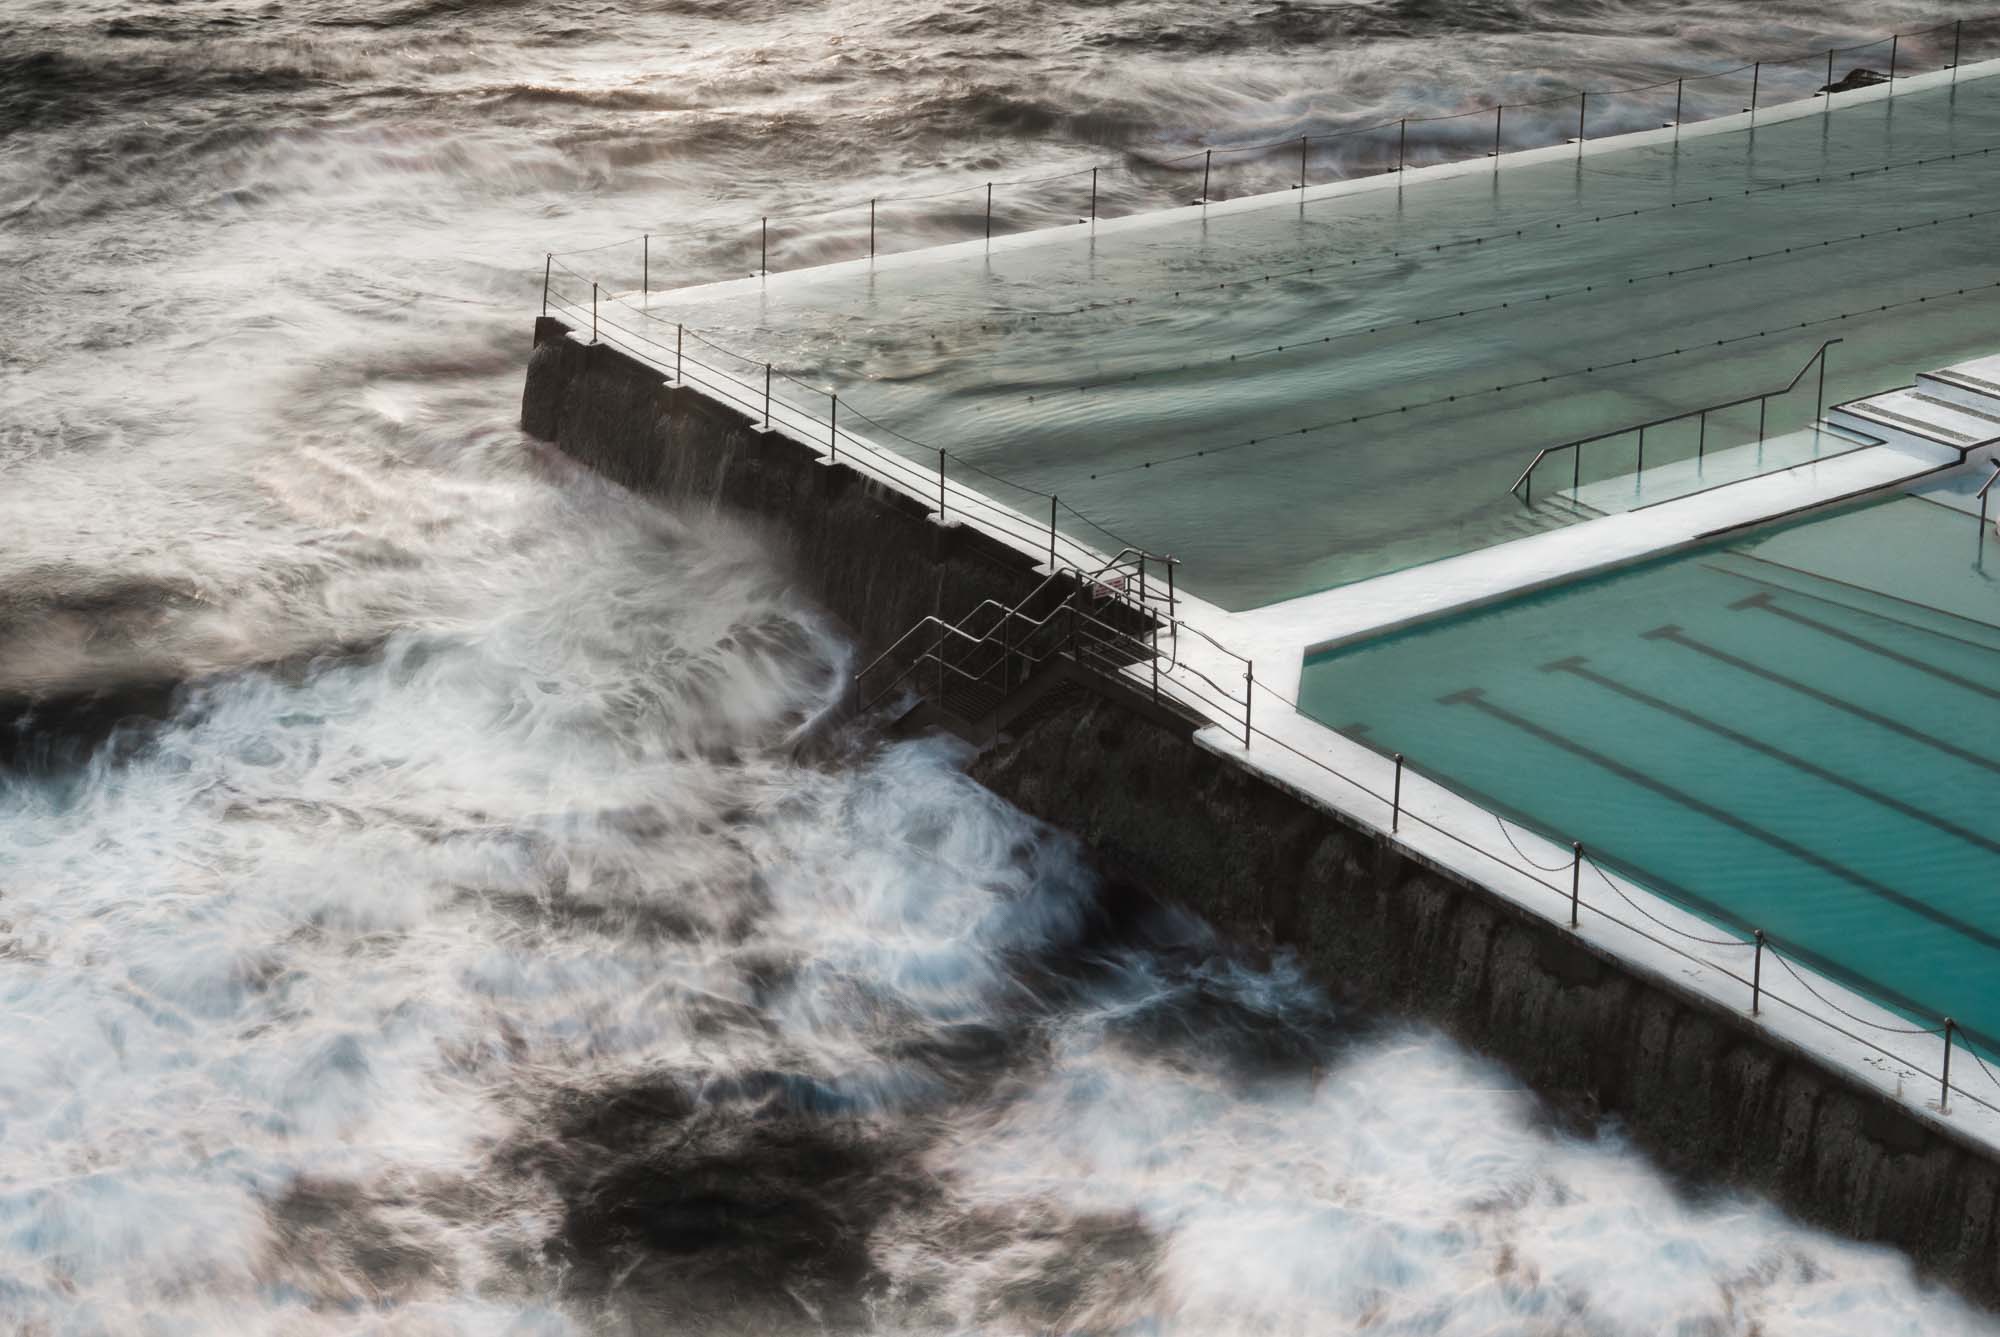 Long exposure of the Bondi Rock Pool in Sydney, with swirling ocean waves surrounding the calm waters of the pool.